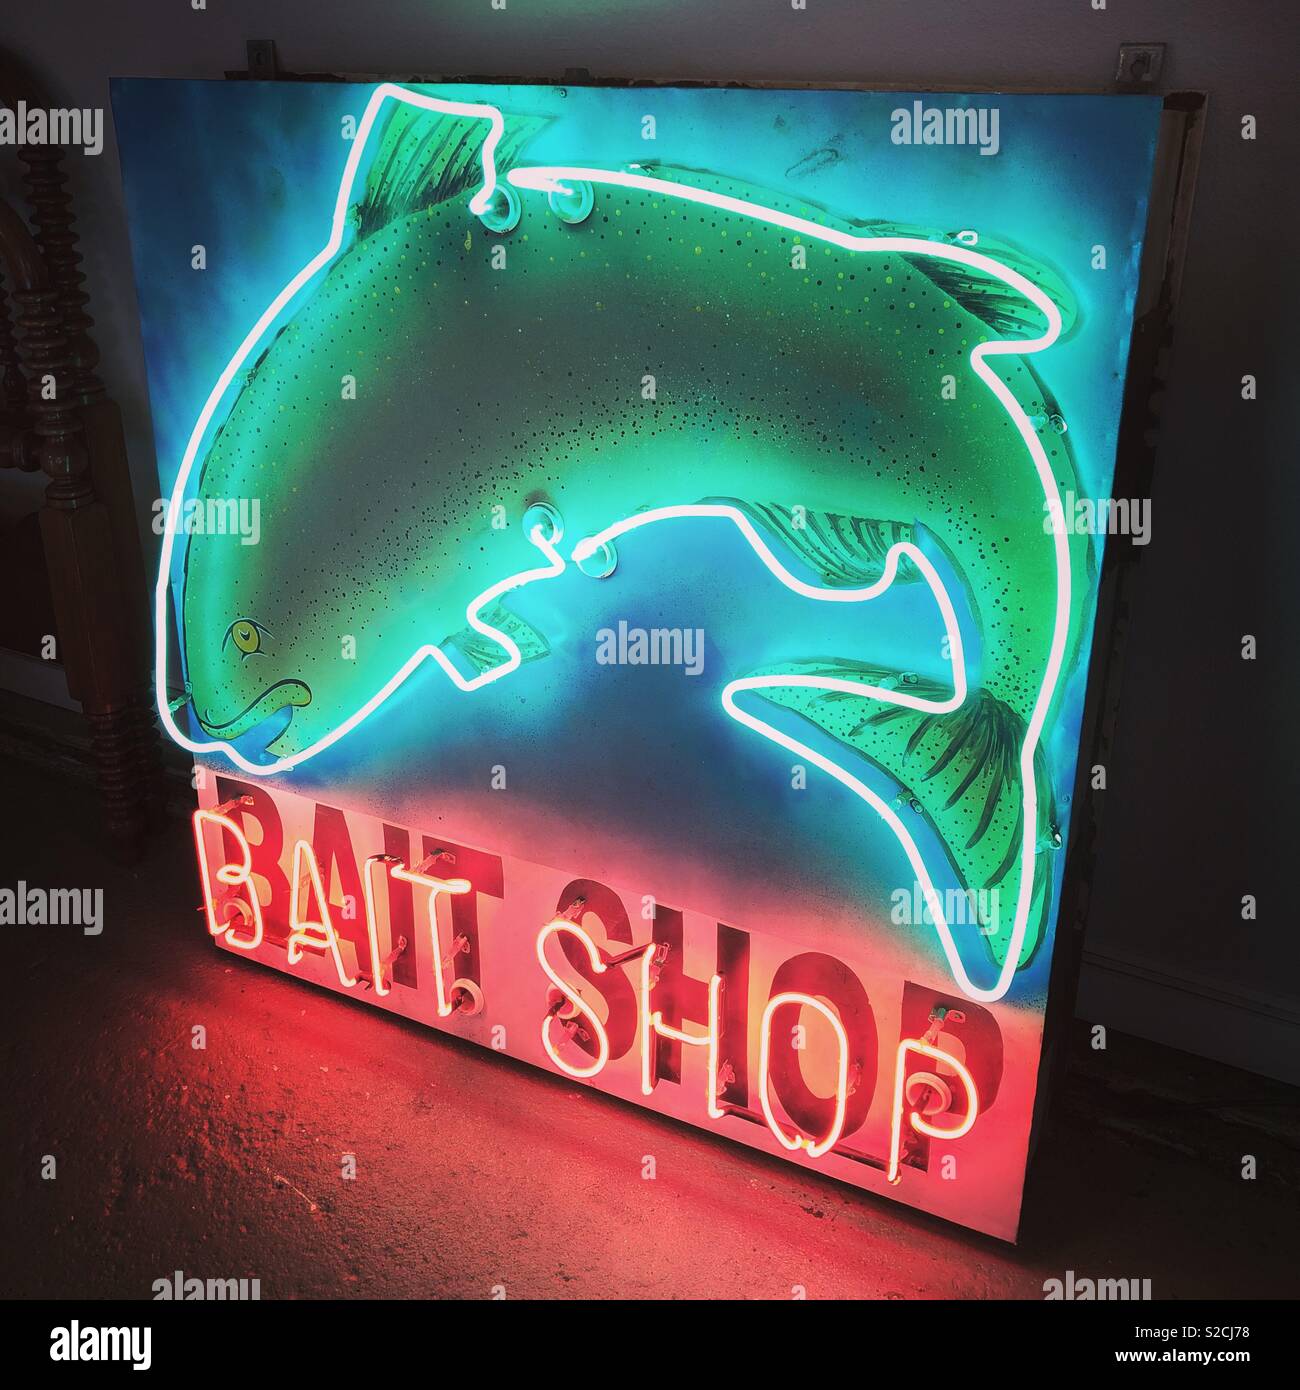 Winchester Tackle Fishing Lure Bait Shop Garage Bar Advertising Man Cave  Blue Neon Wall Clock Sign